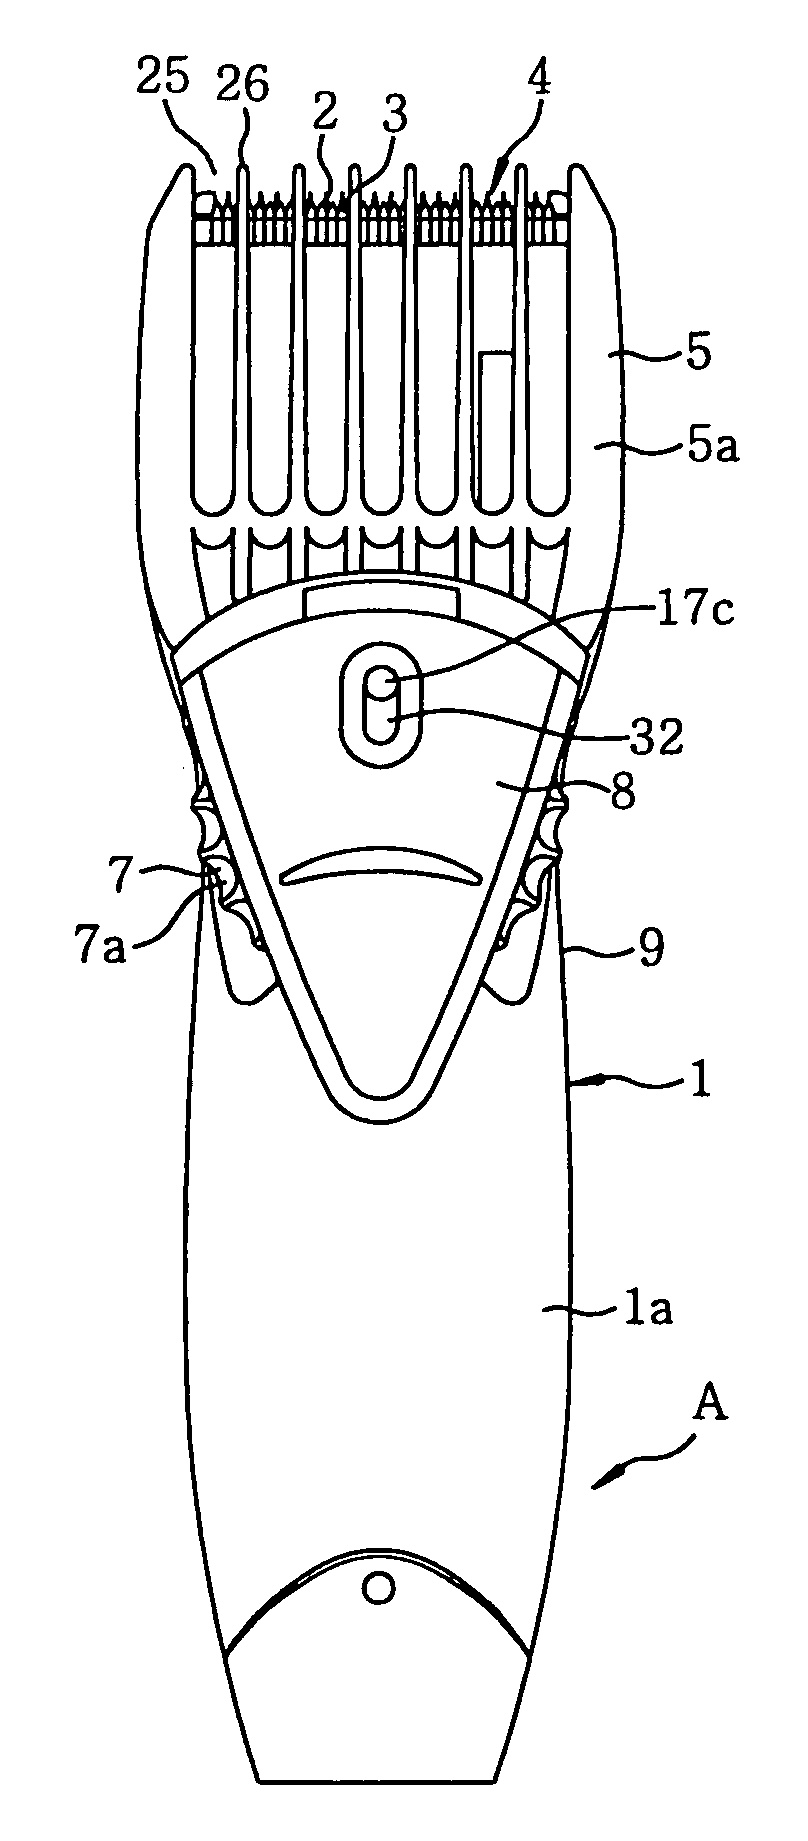 Hair trimmer with rattle dampening structure